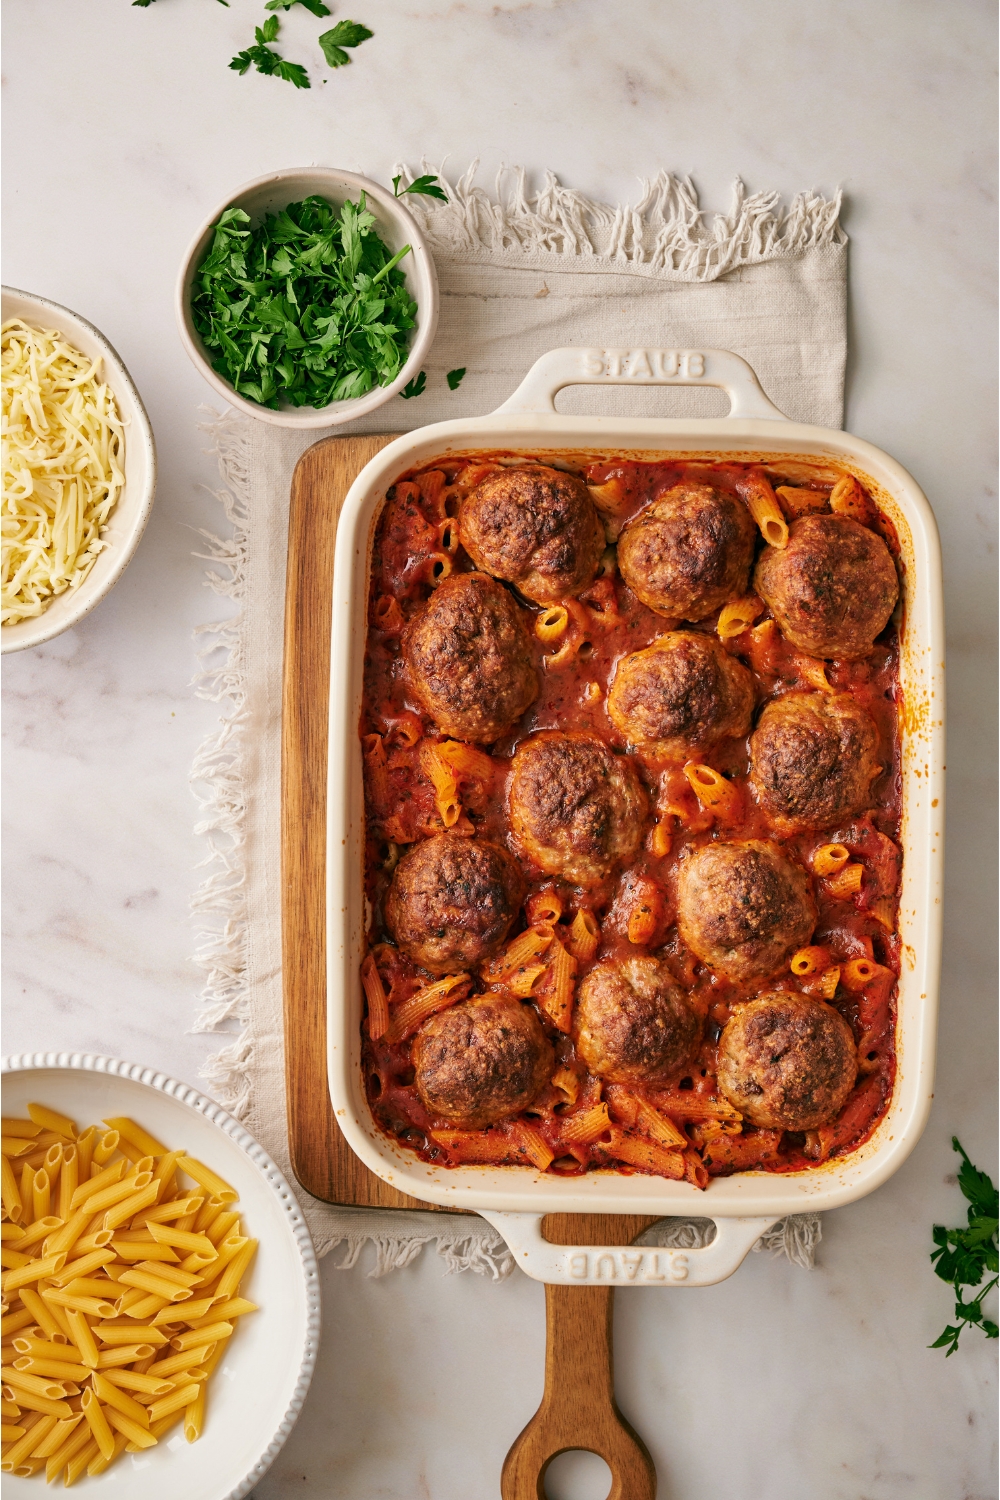 Freshly baked pasta with large browned meatballs on top.